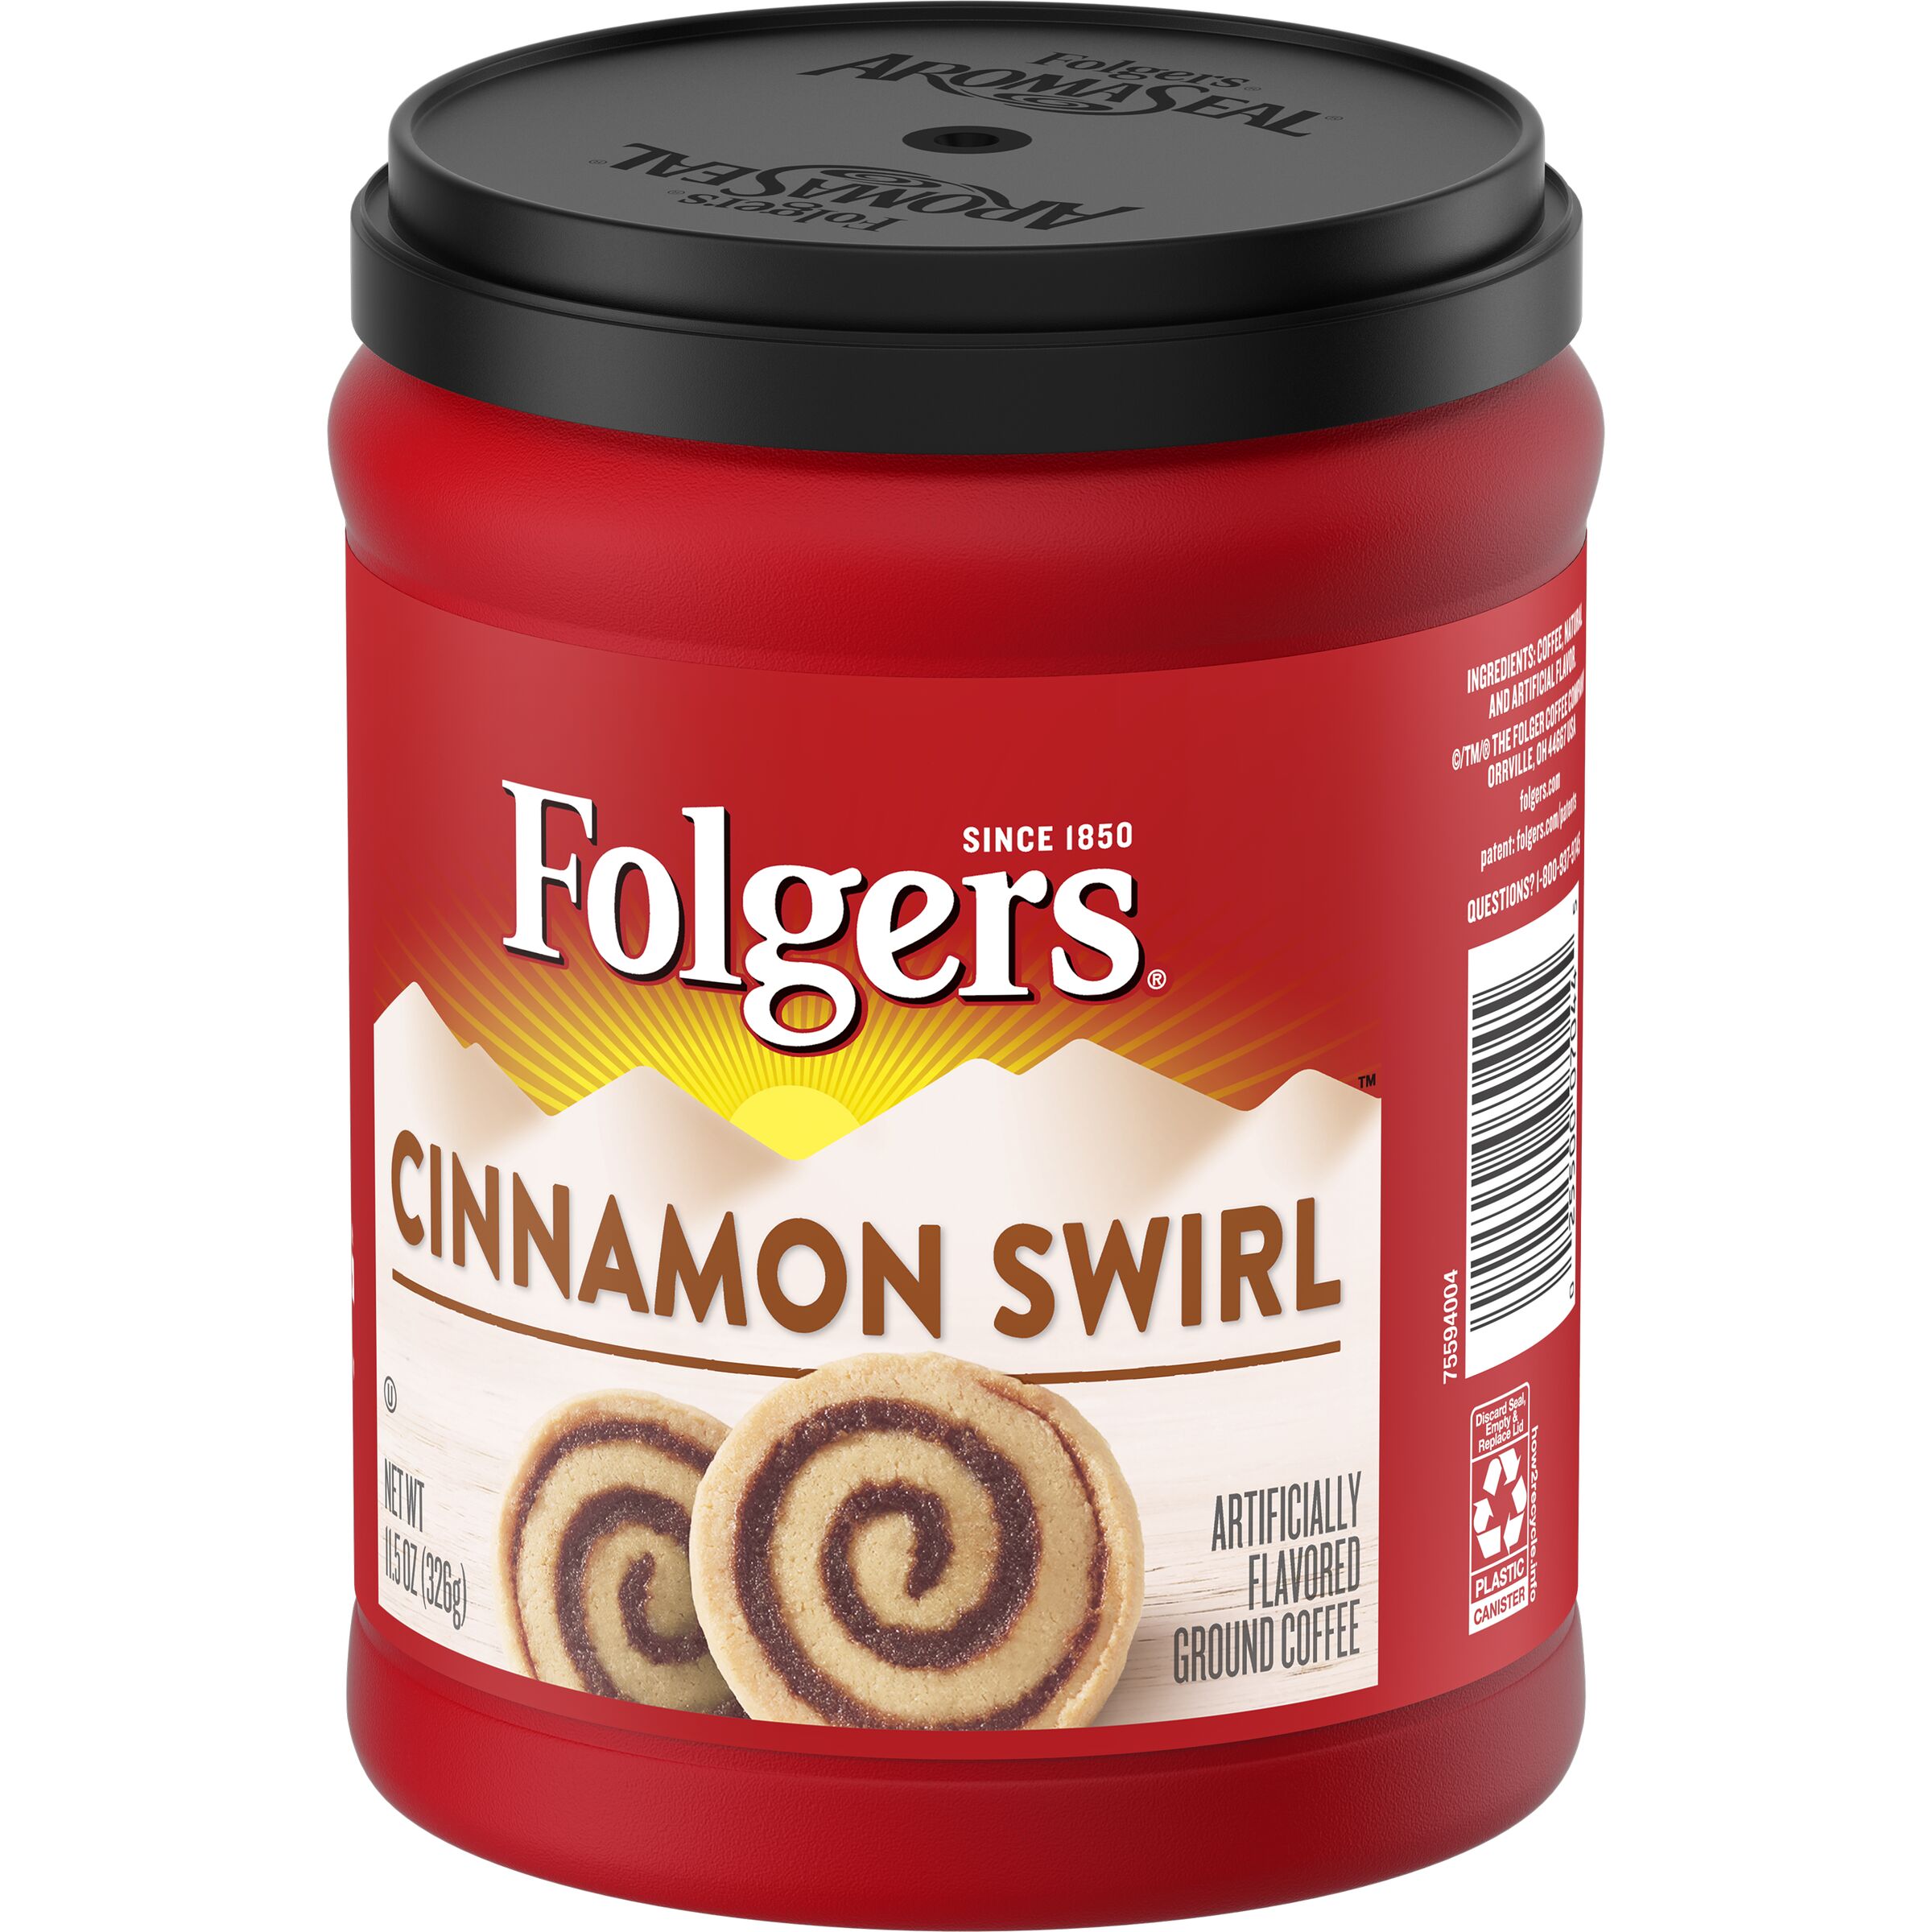 Folgers Cinnamon Swirl Artificially Flavored Ground Coffee, 11.5-Ounce - image 2 of 6